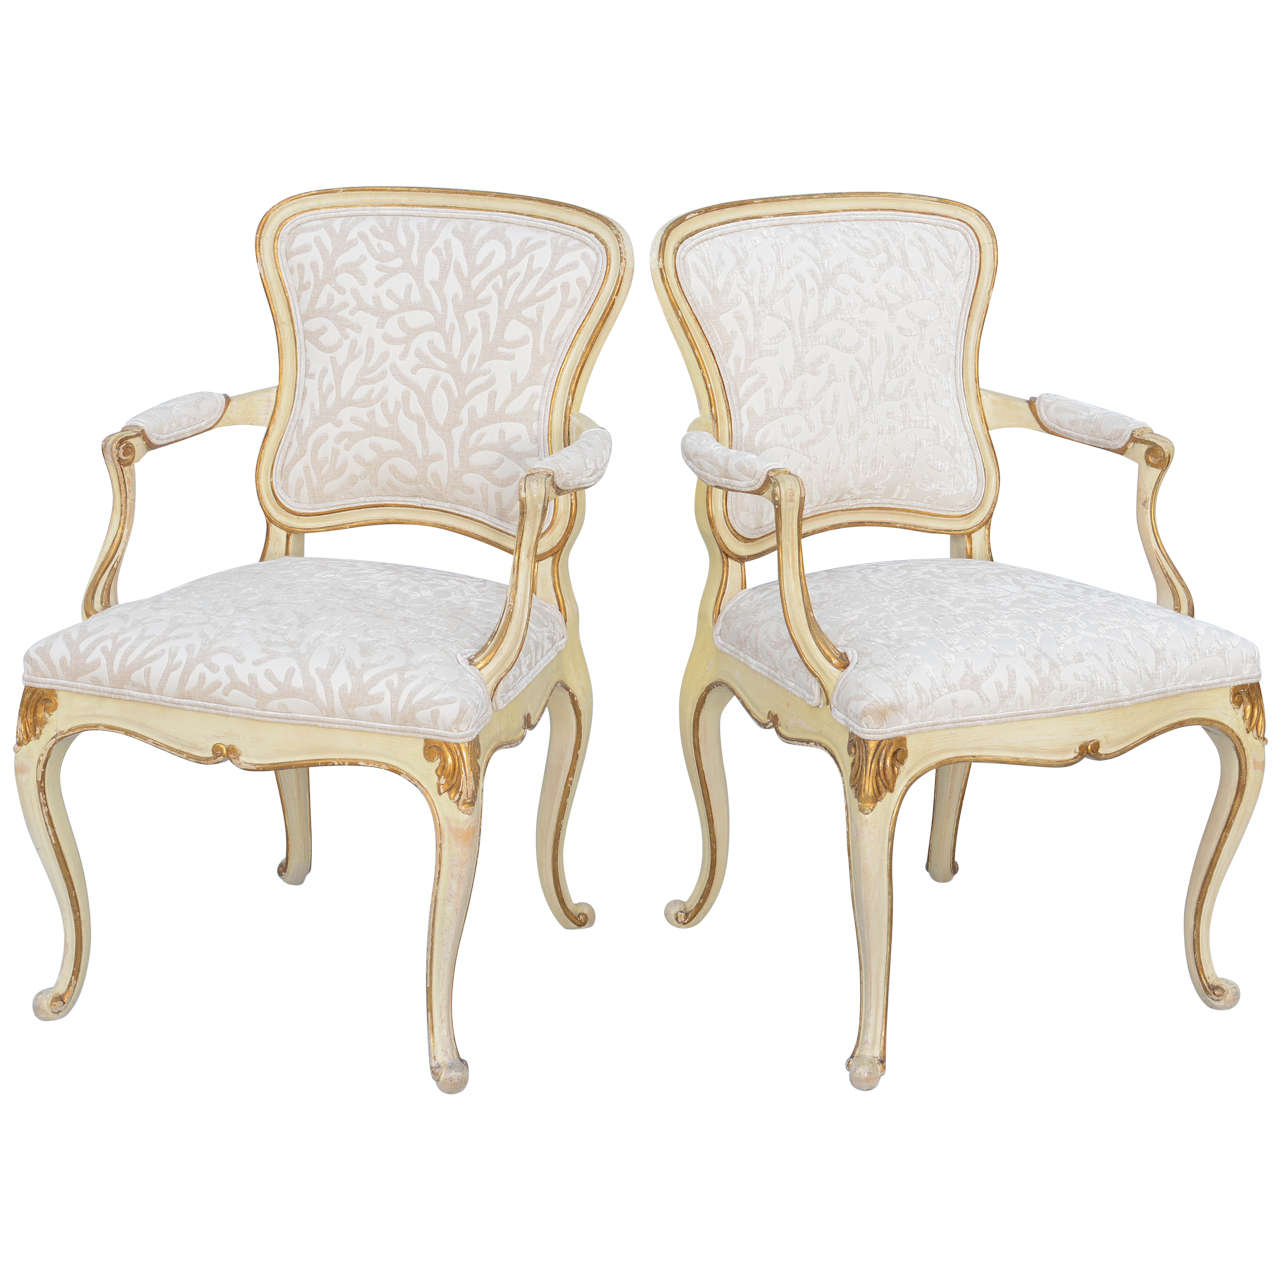 Pair of Painted & Parcel Gilt Armchairs